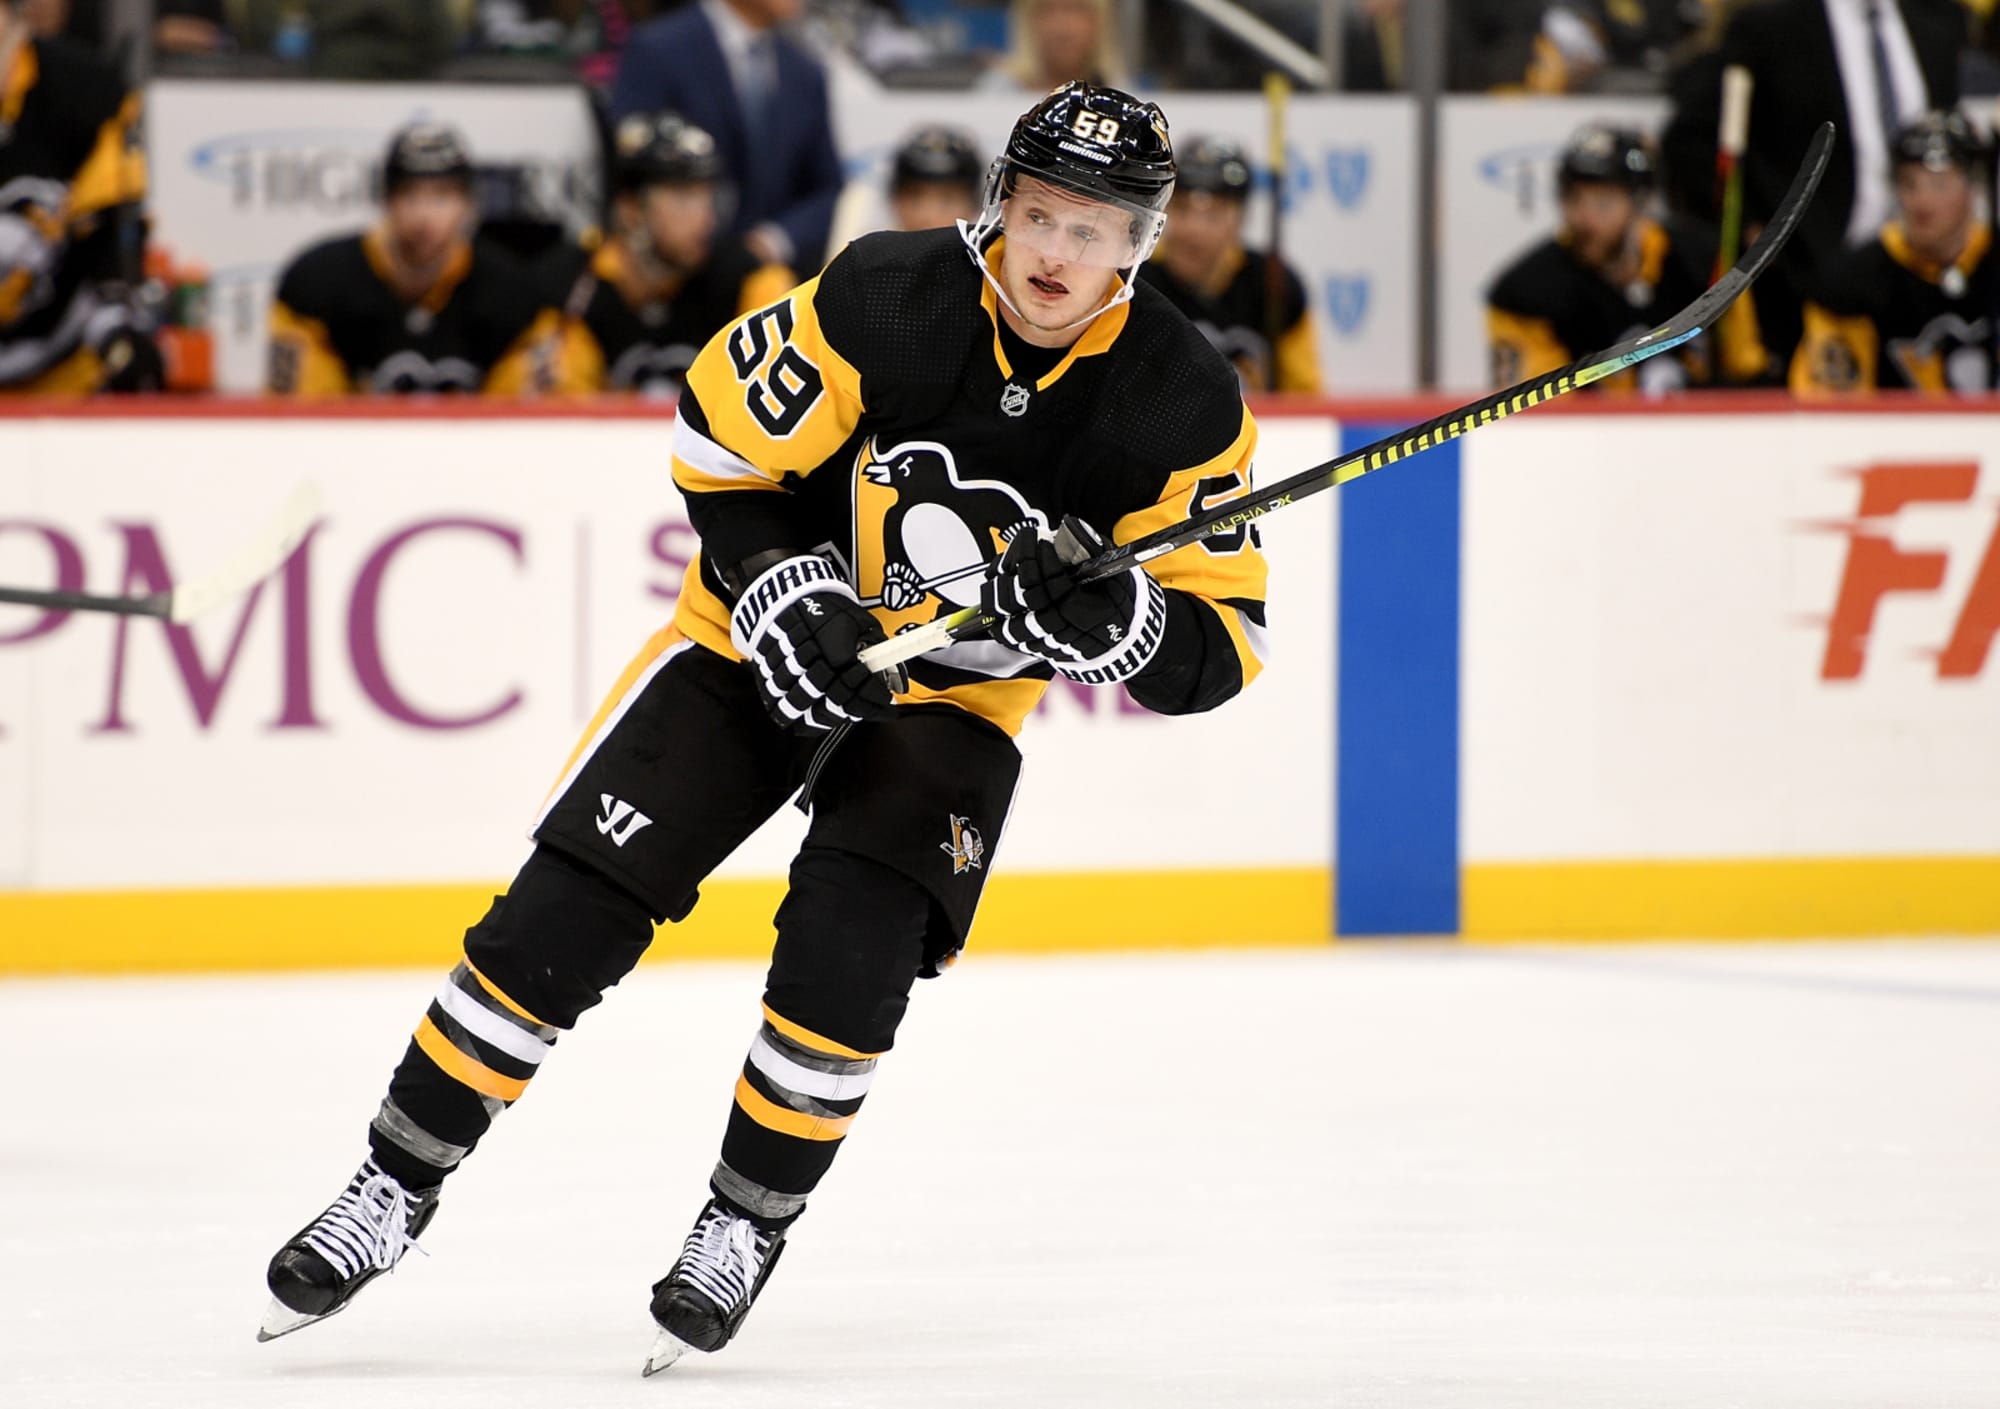 Pittsburgh Penguins Even in Loss, Jake Guentzel Continues Elite Play